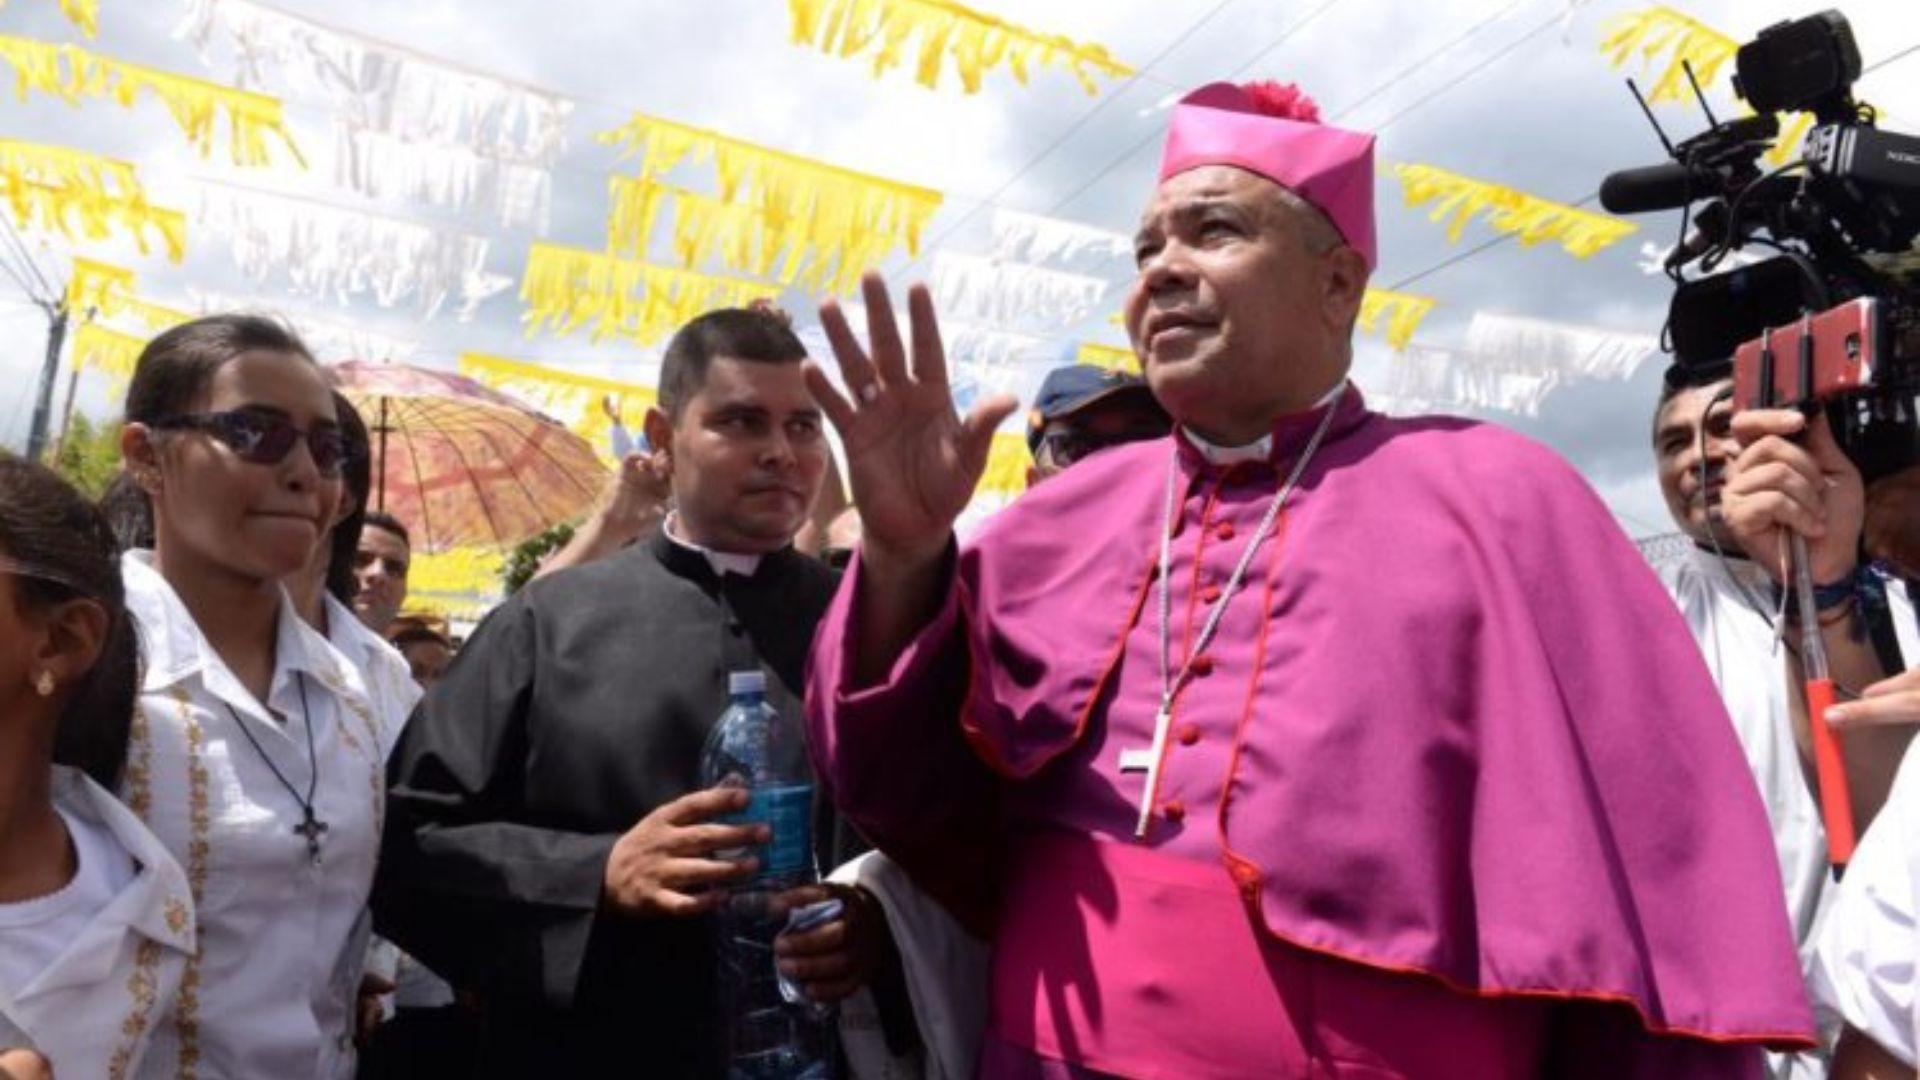 Monsignor Sándigo complies with Ortega's order and will not hold a "Palm Sunday" procession